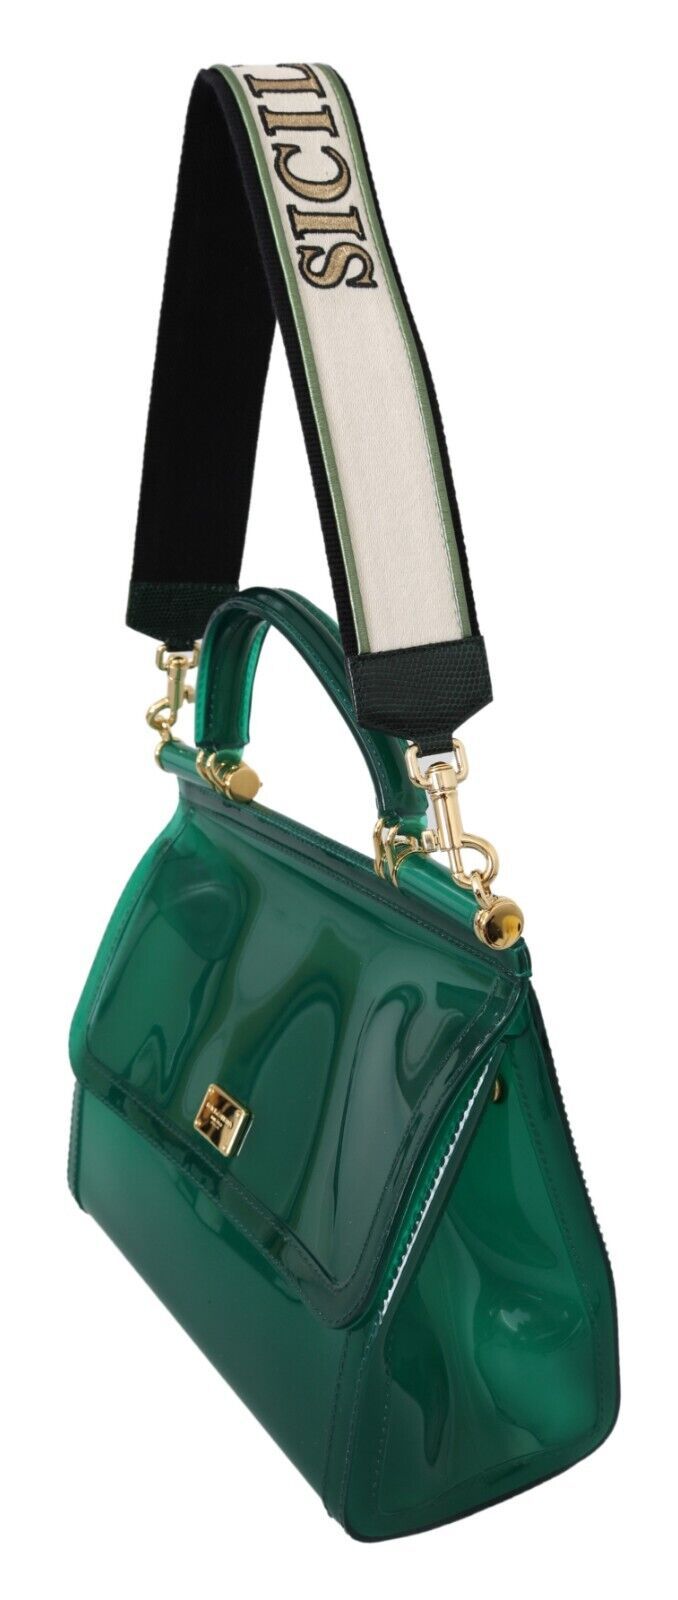 Sicily Bag in Lush Green with Gold Accents